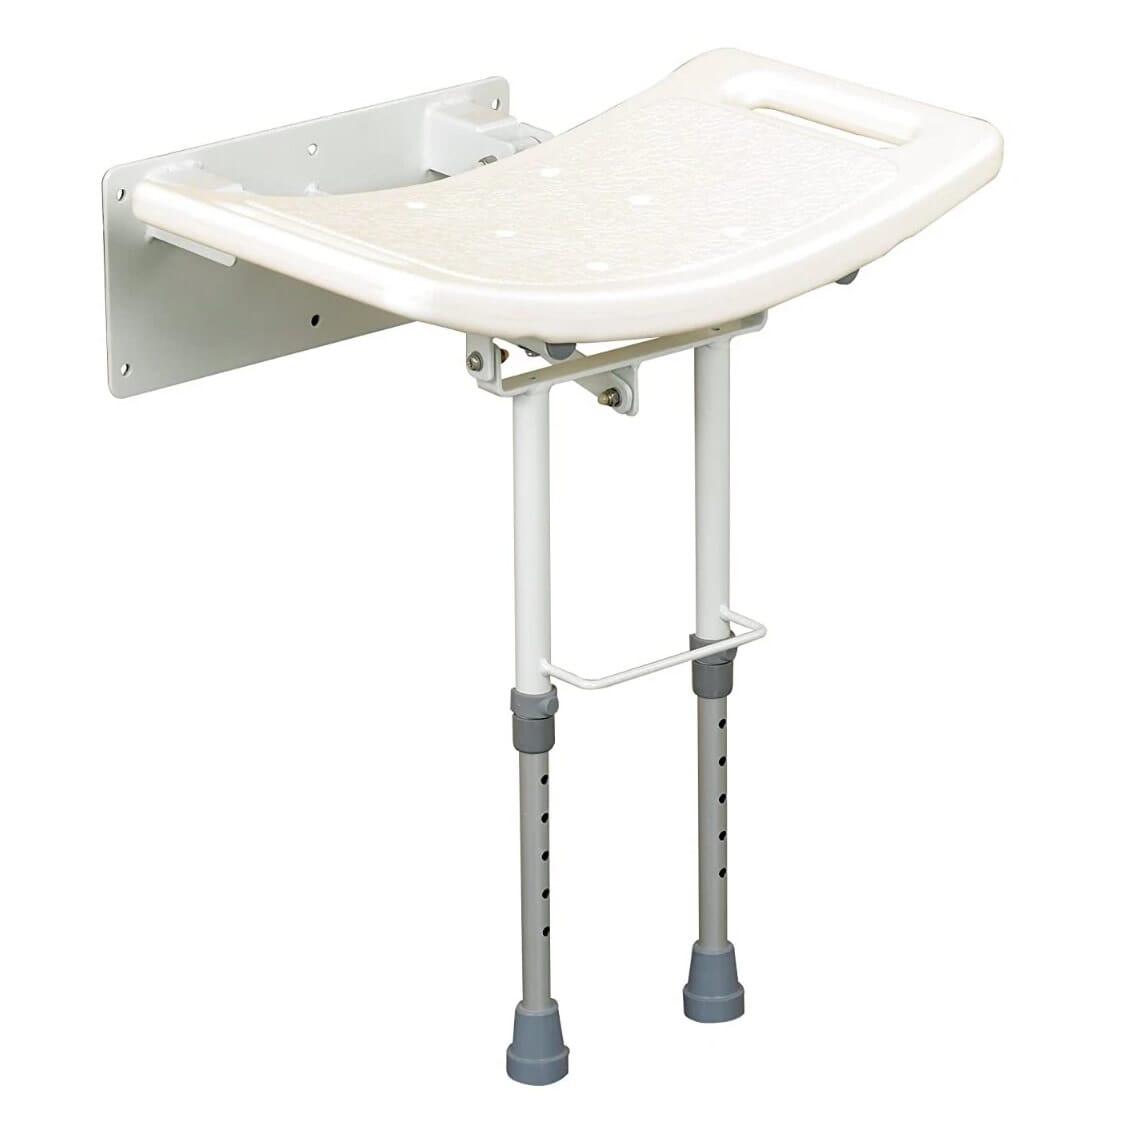 View Days Wall Mounted Shower Seat with Legs Steel information